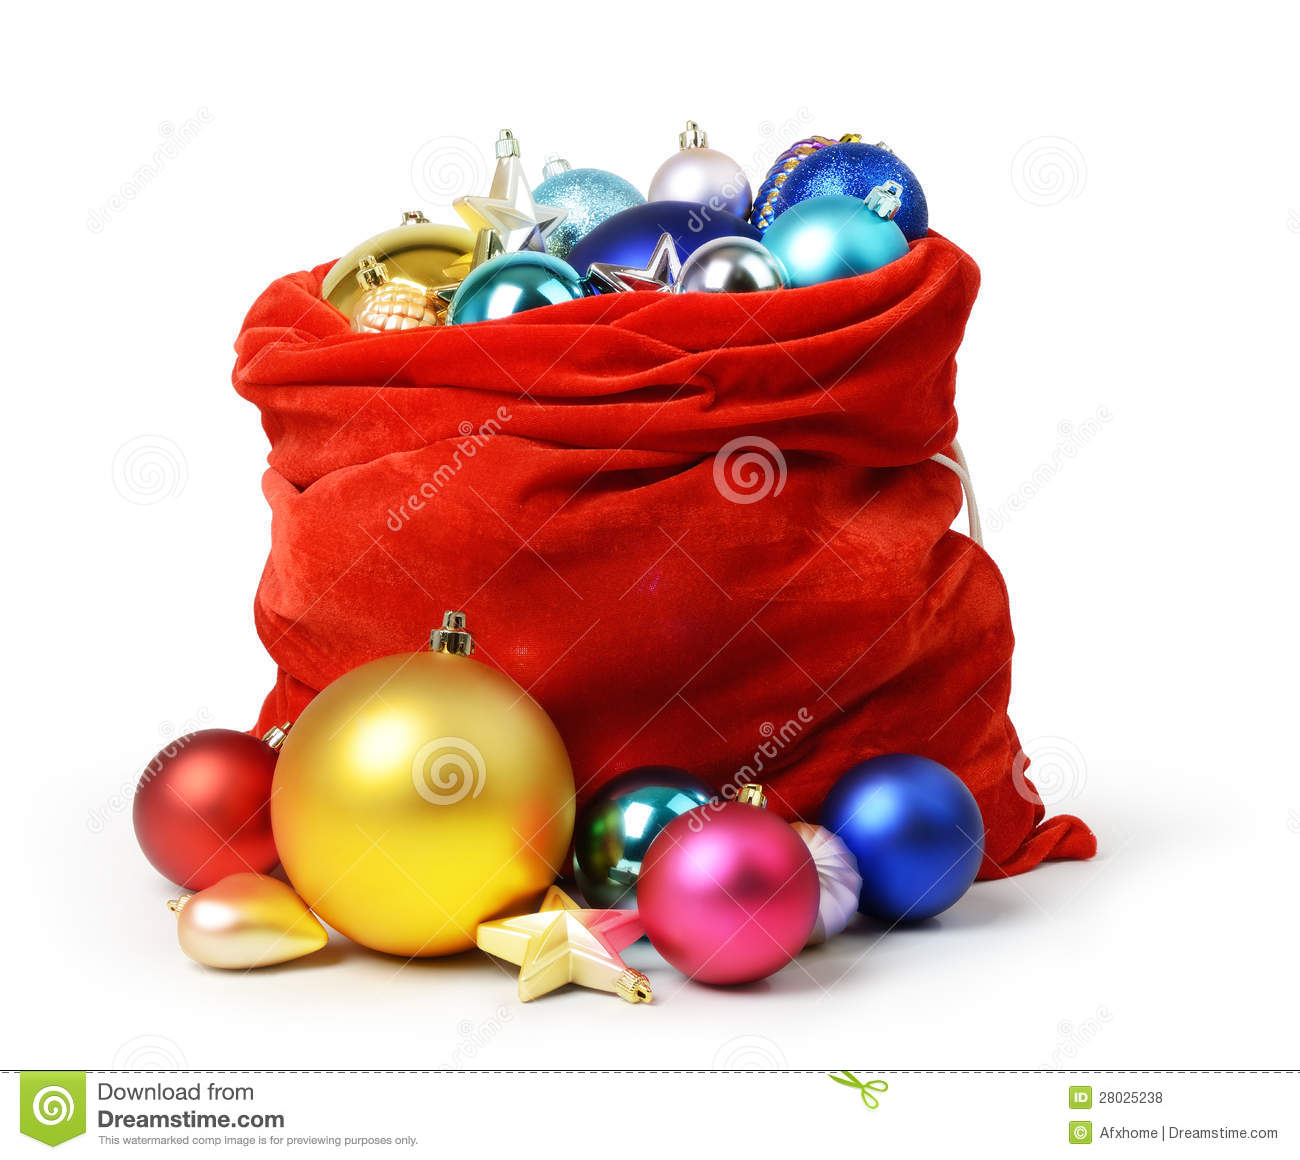 Santa Claus Red Bag With Christmas Toys Royalty Free Stock Photos